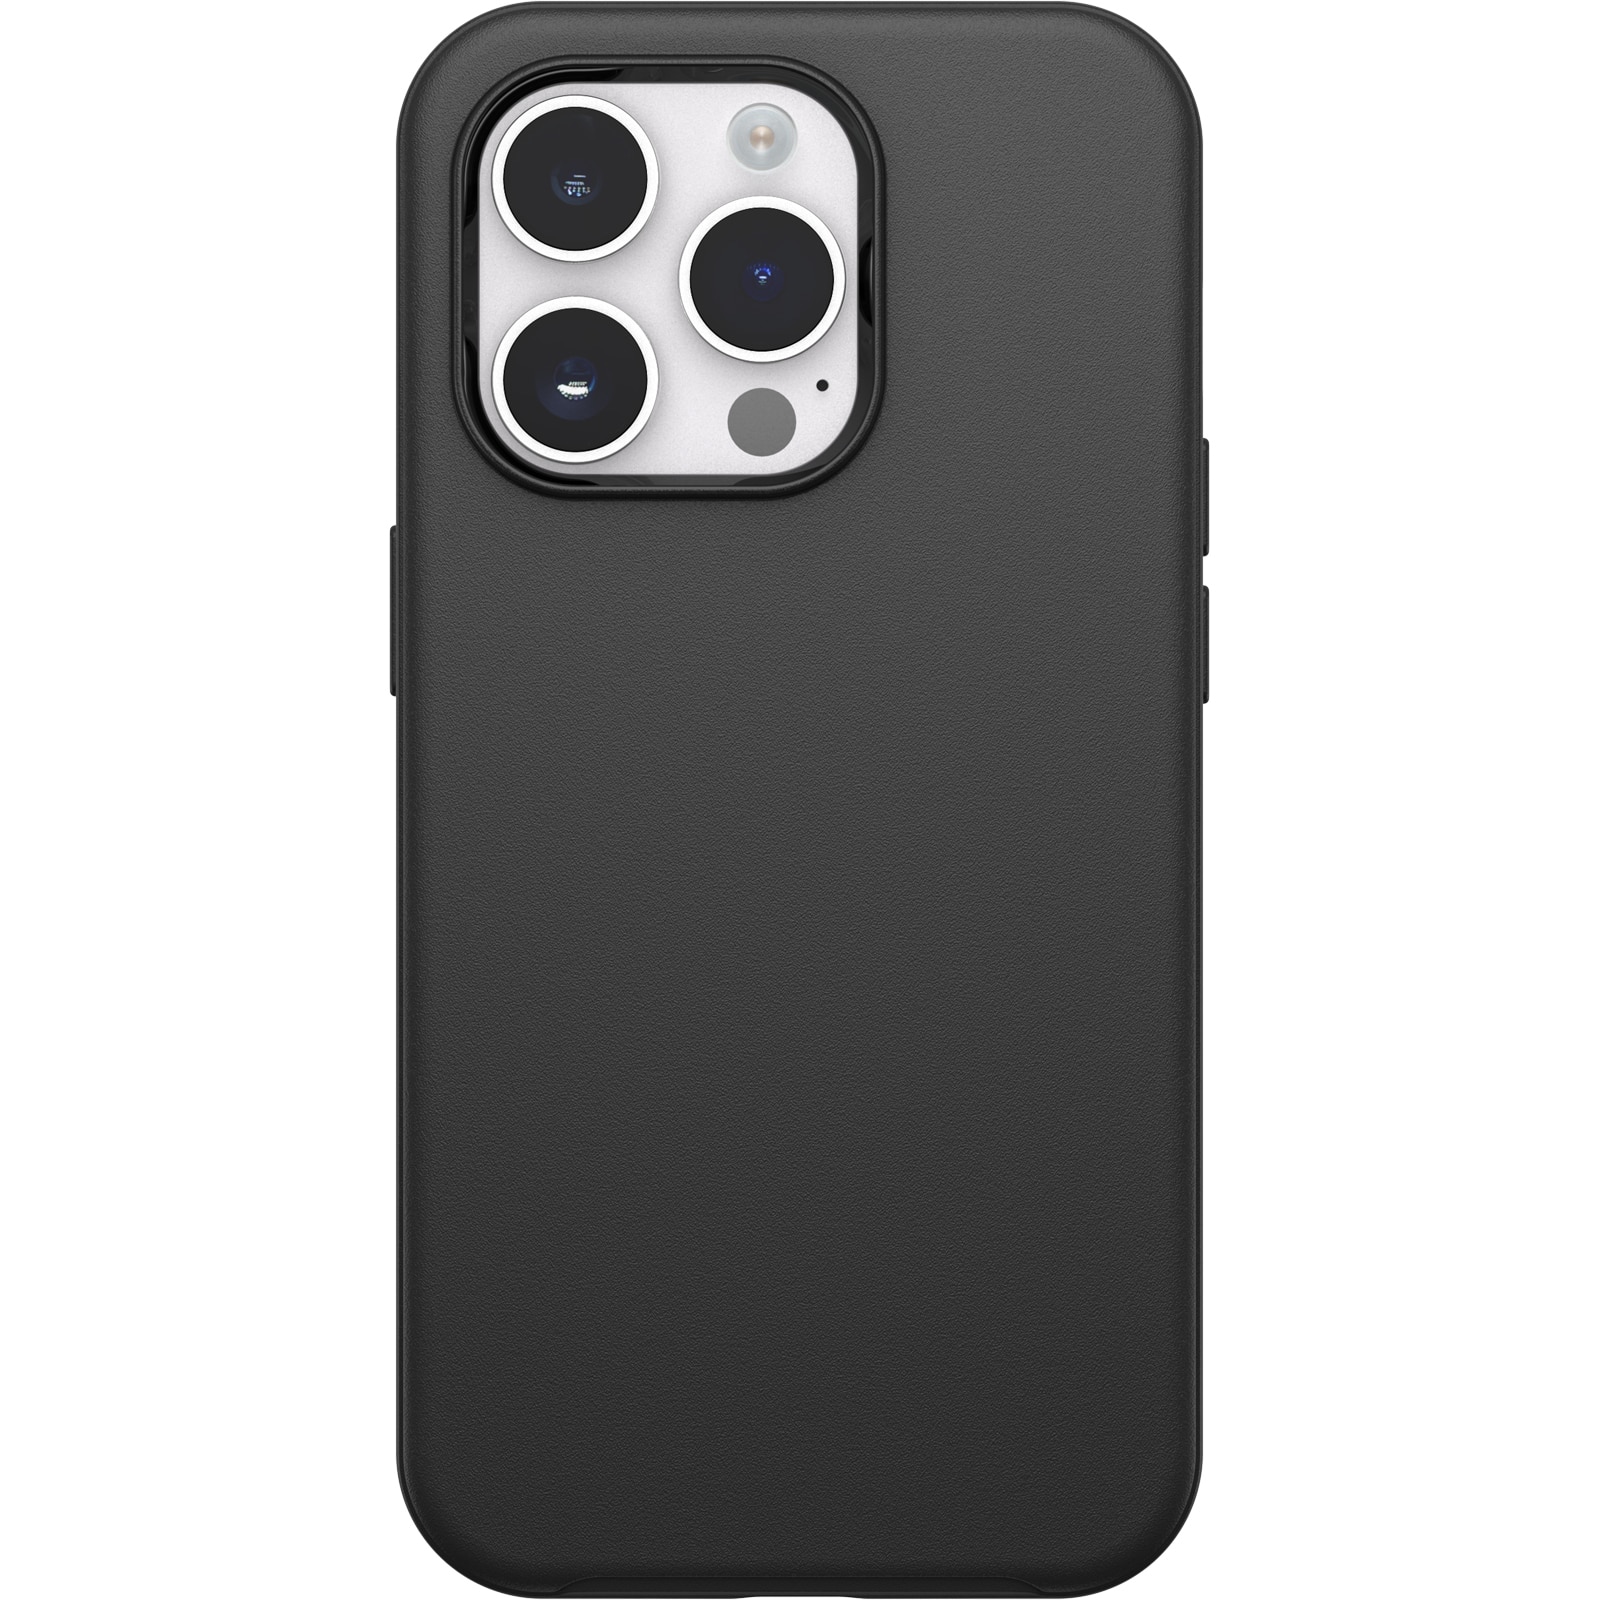 Cover Symmetry iPhone 14 Pro Max Black